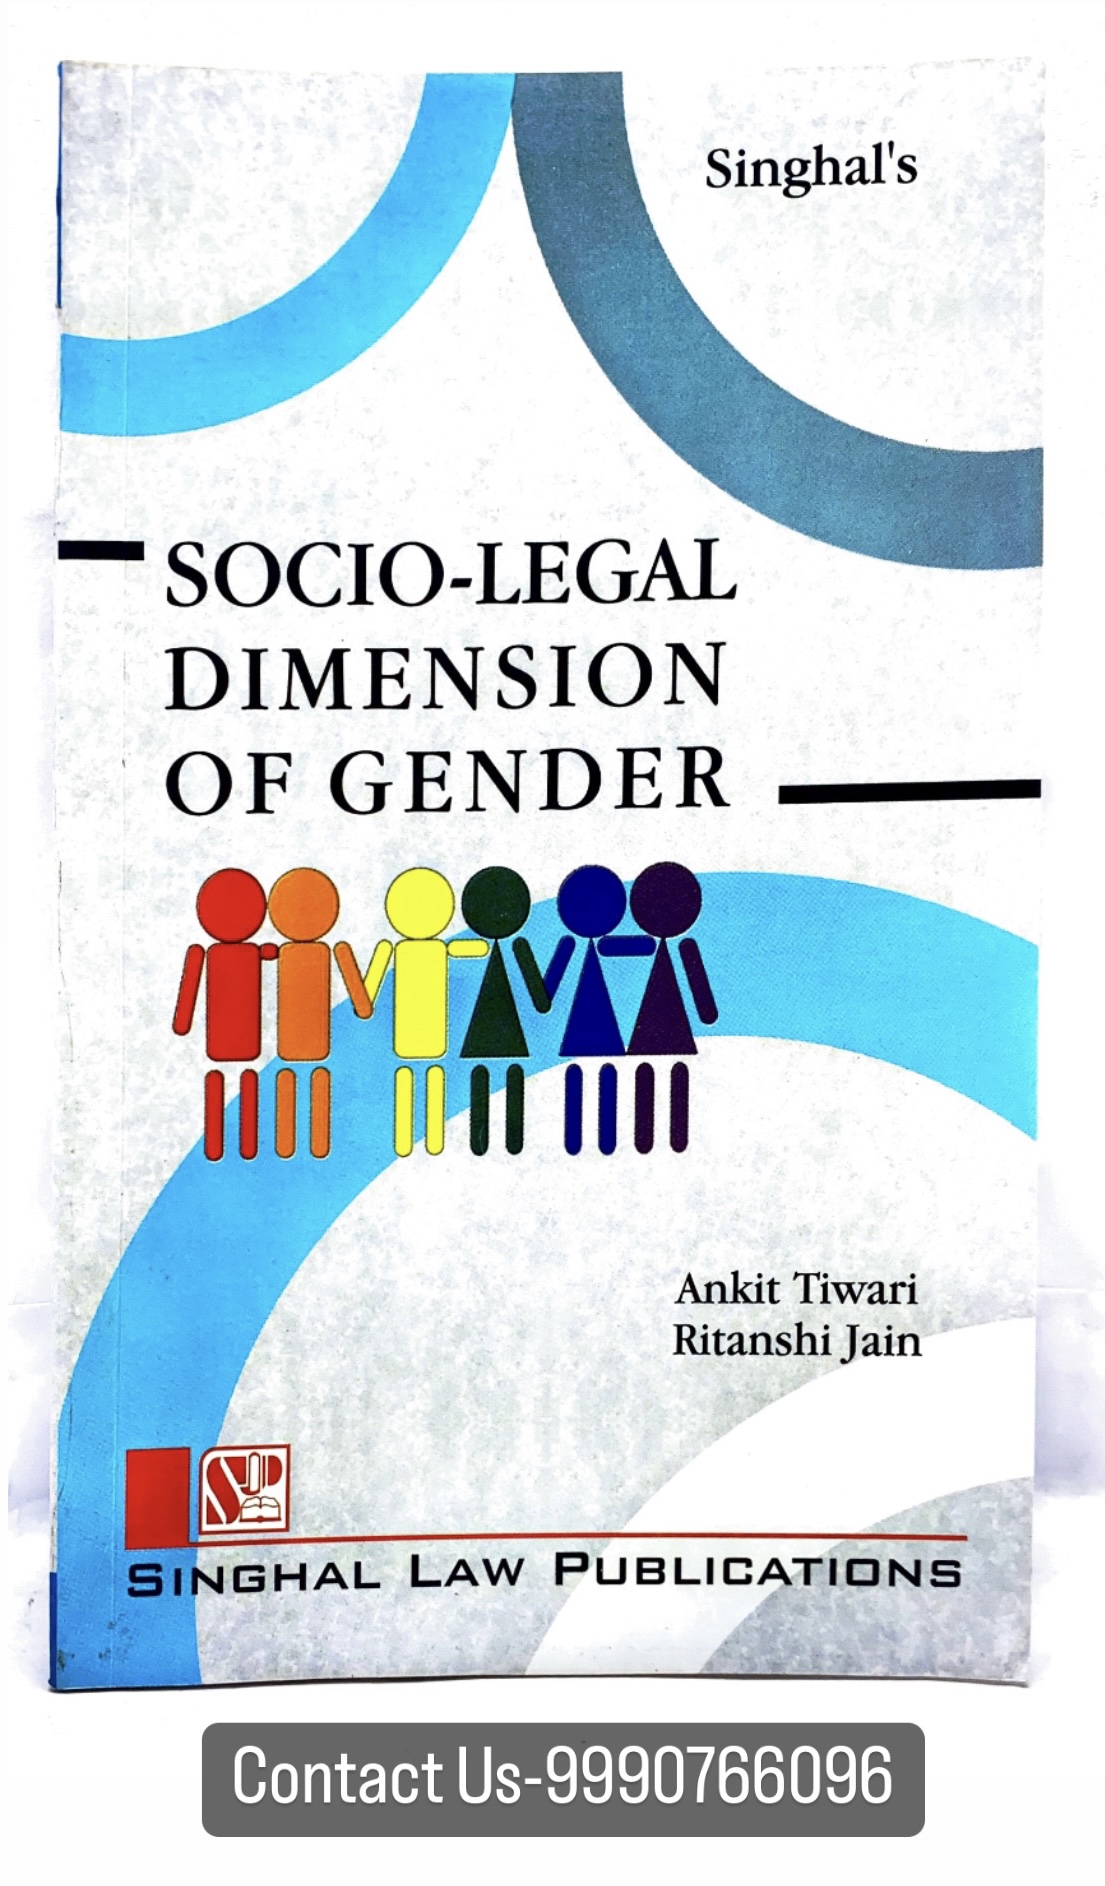 Singhal's　Socio-Legal　Gender　Books　Exclusive　and　Exam　Dimension　for　Law　Judiciary　Books　of　Portal